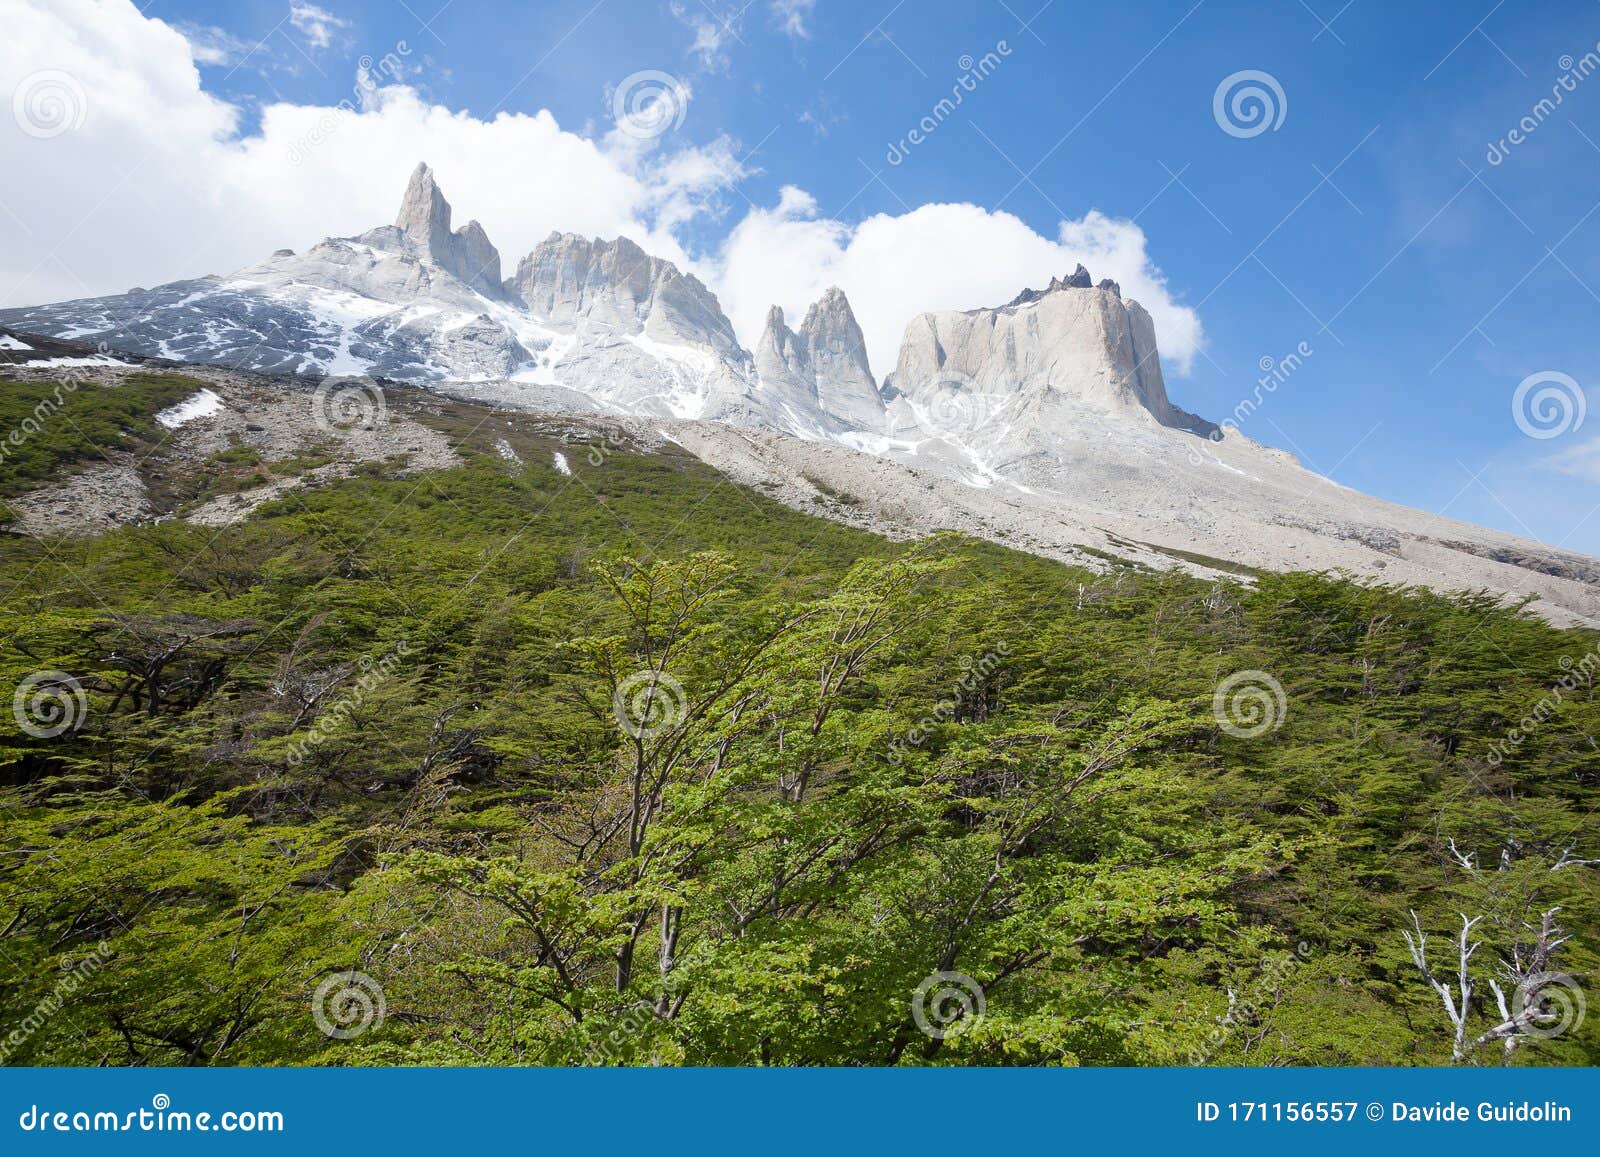 french valley landscape, torres del paine, chile